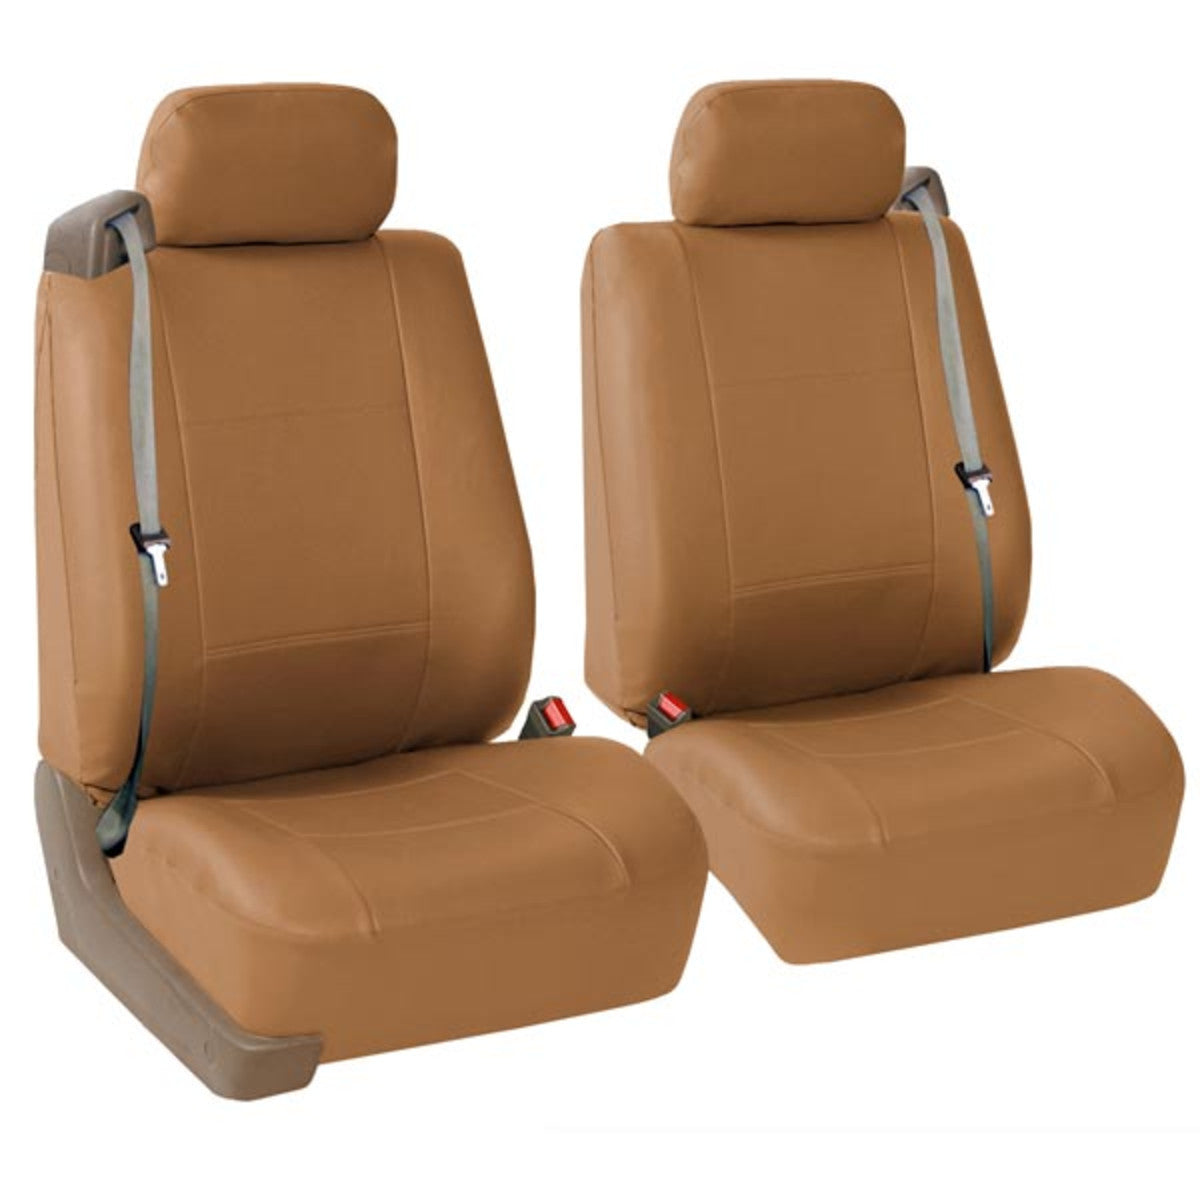 Built-in Seat Belt Compatible PU Leather Seat Covers